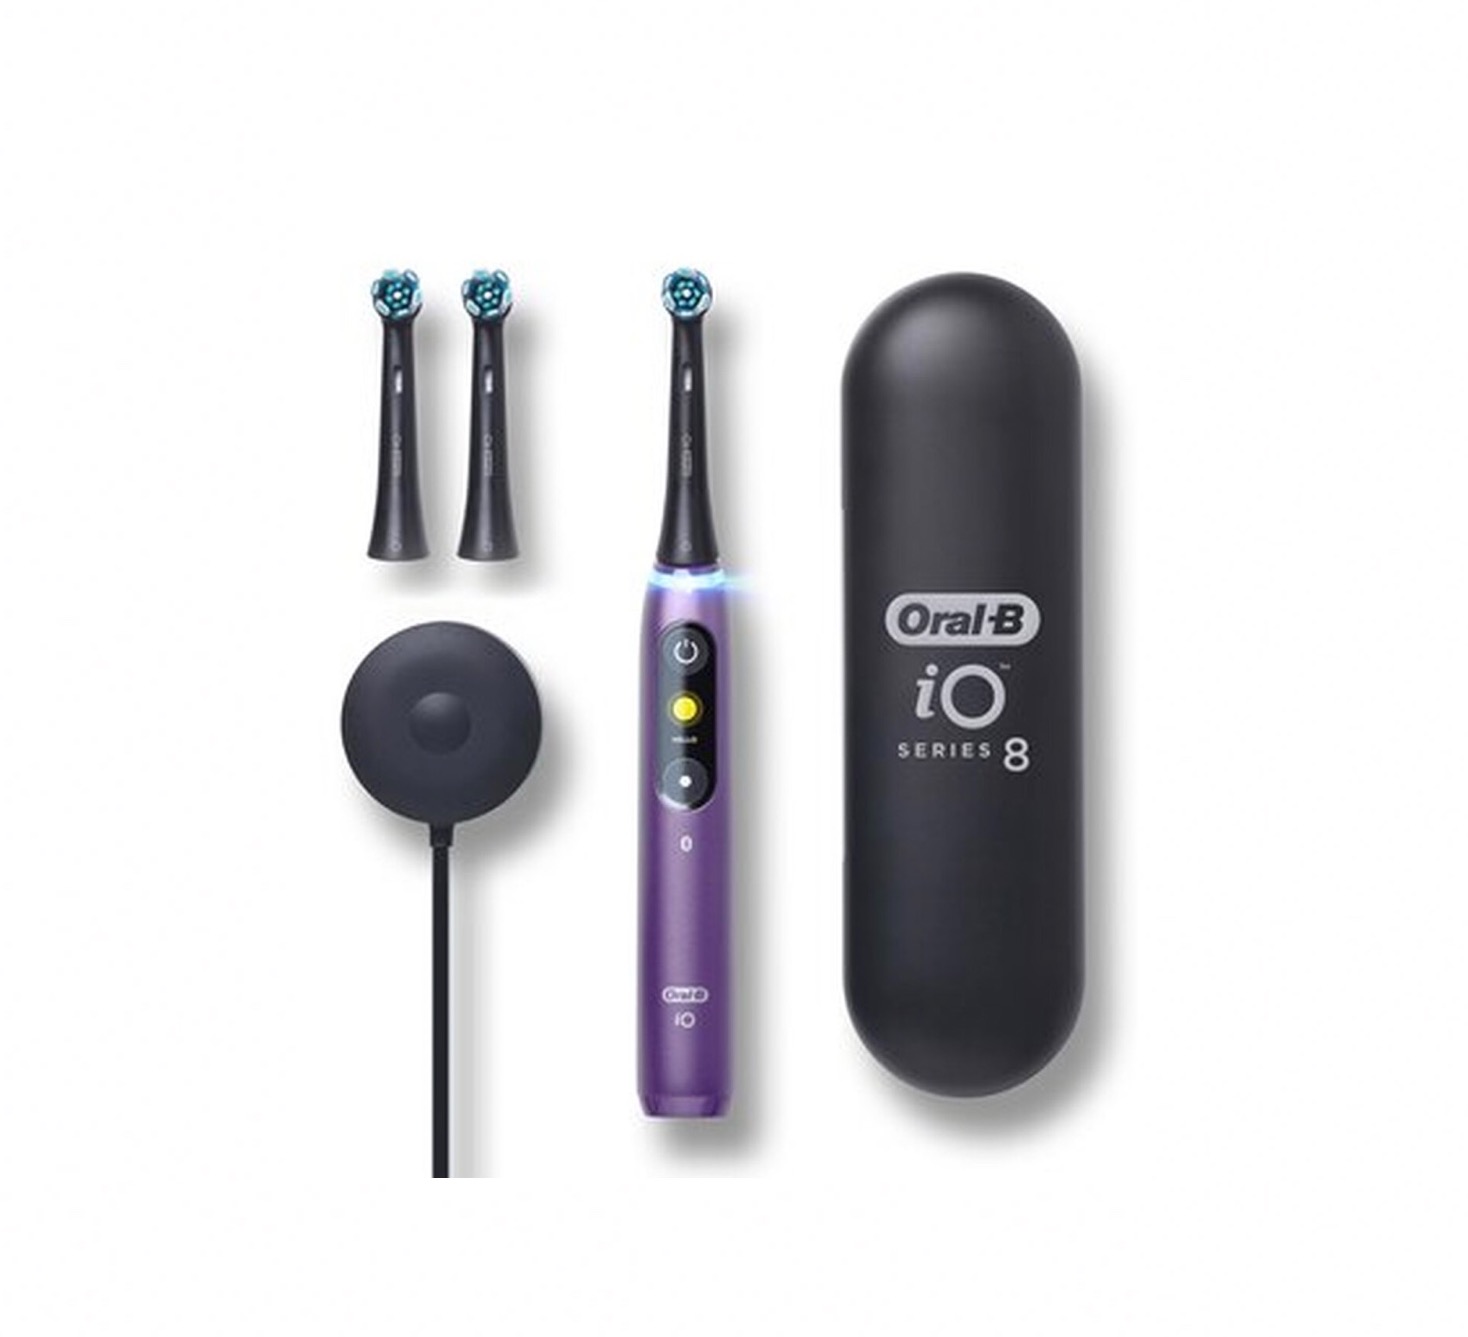 Oral-B iO Series 8 Electric Toothbrush in purple